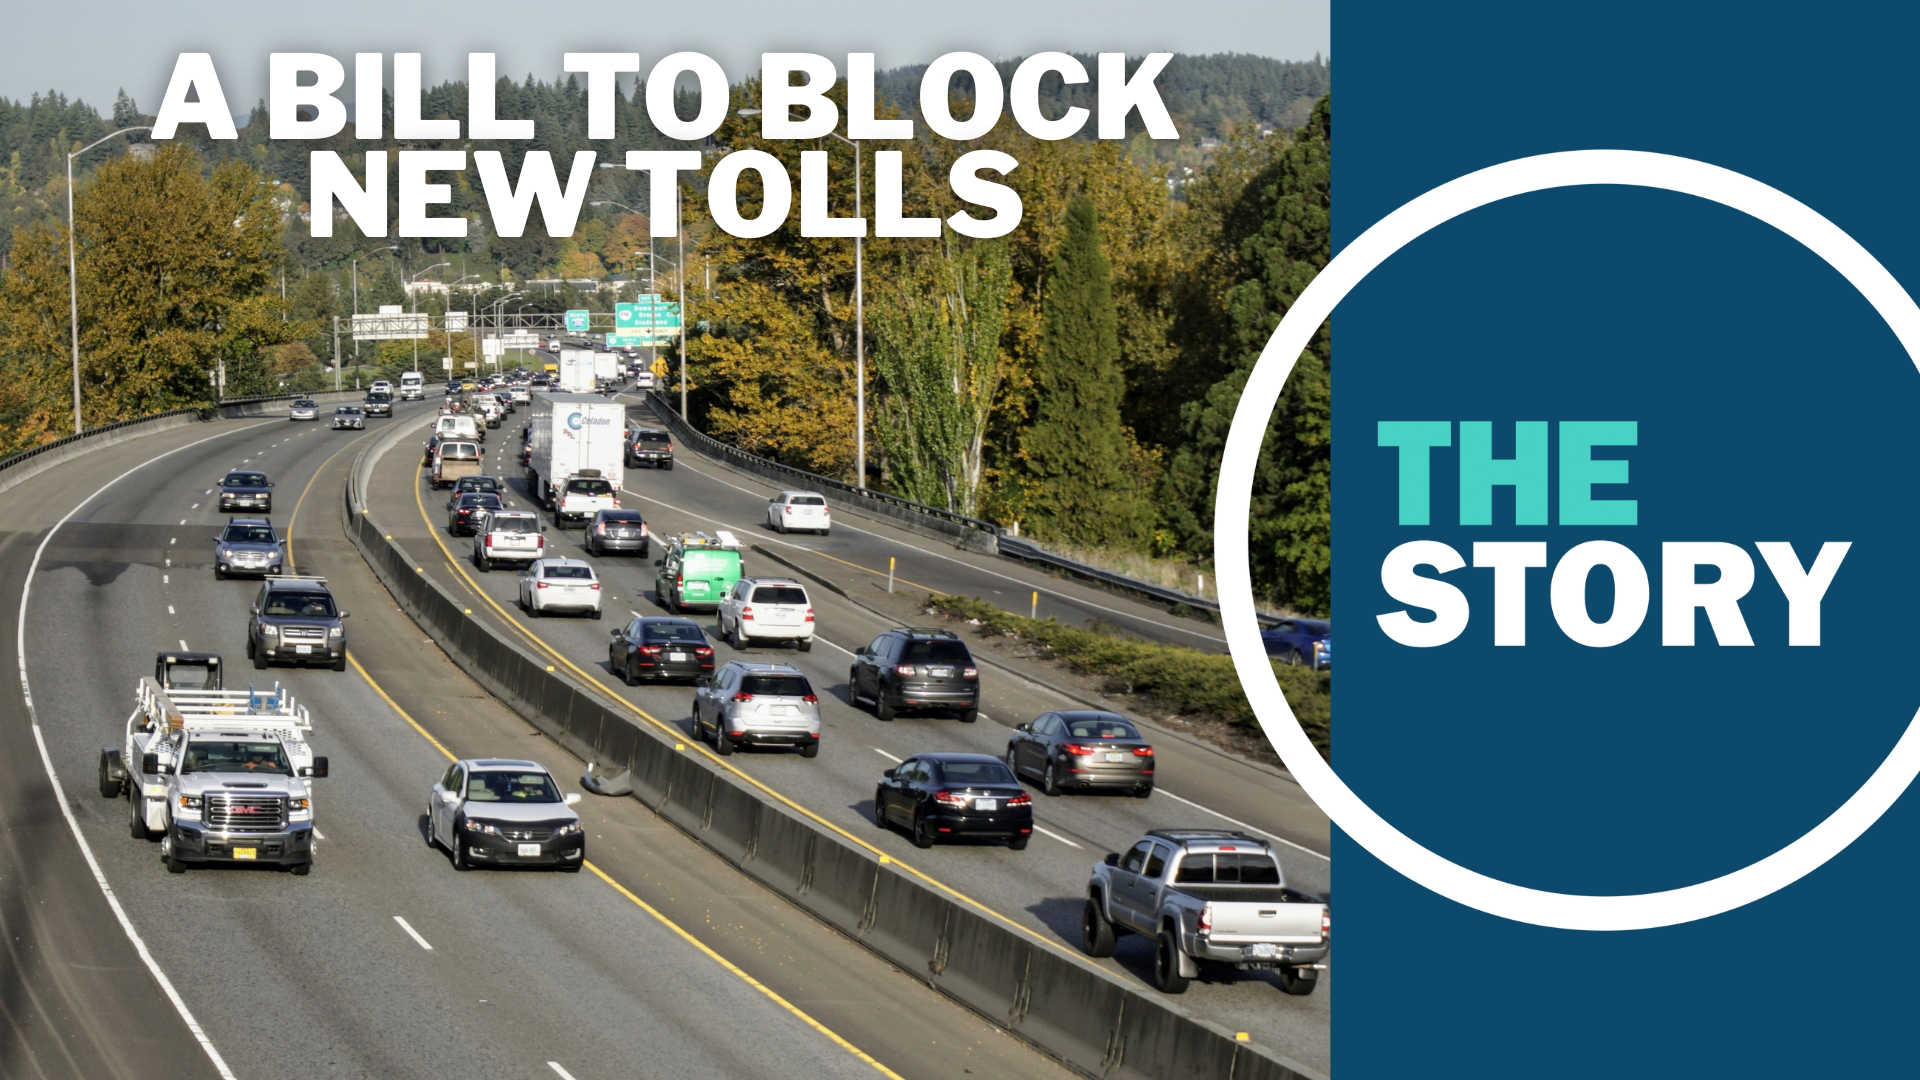 The bill, introduced by state Sen. Mark Meek, would allow for tolling on the I-5 Columbia River crossing, both old and new. But that’s it.